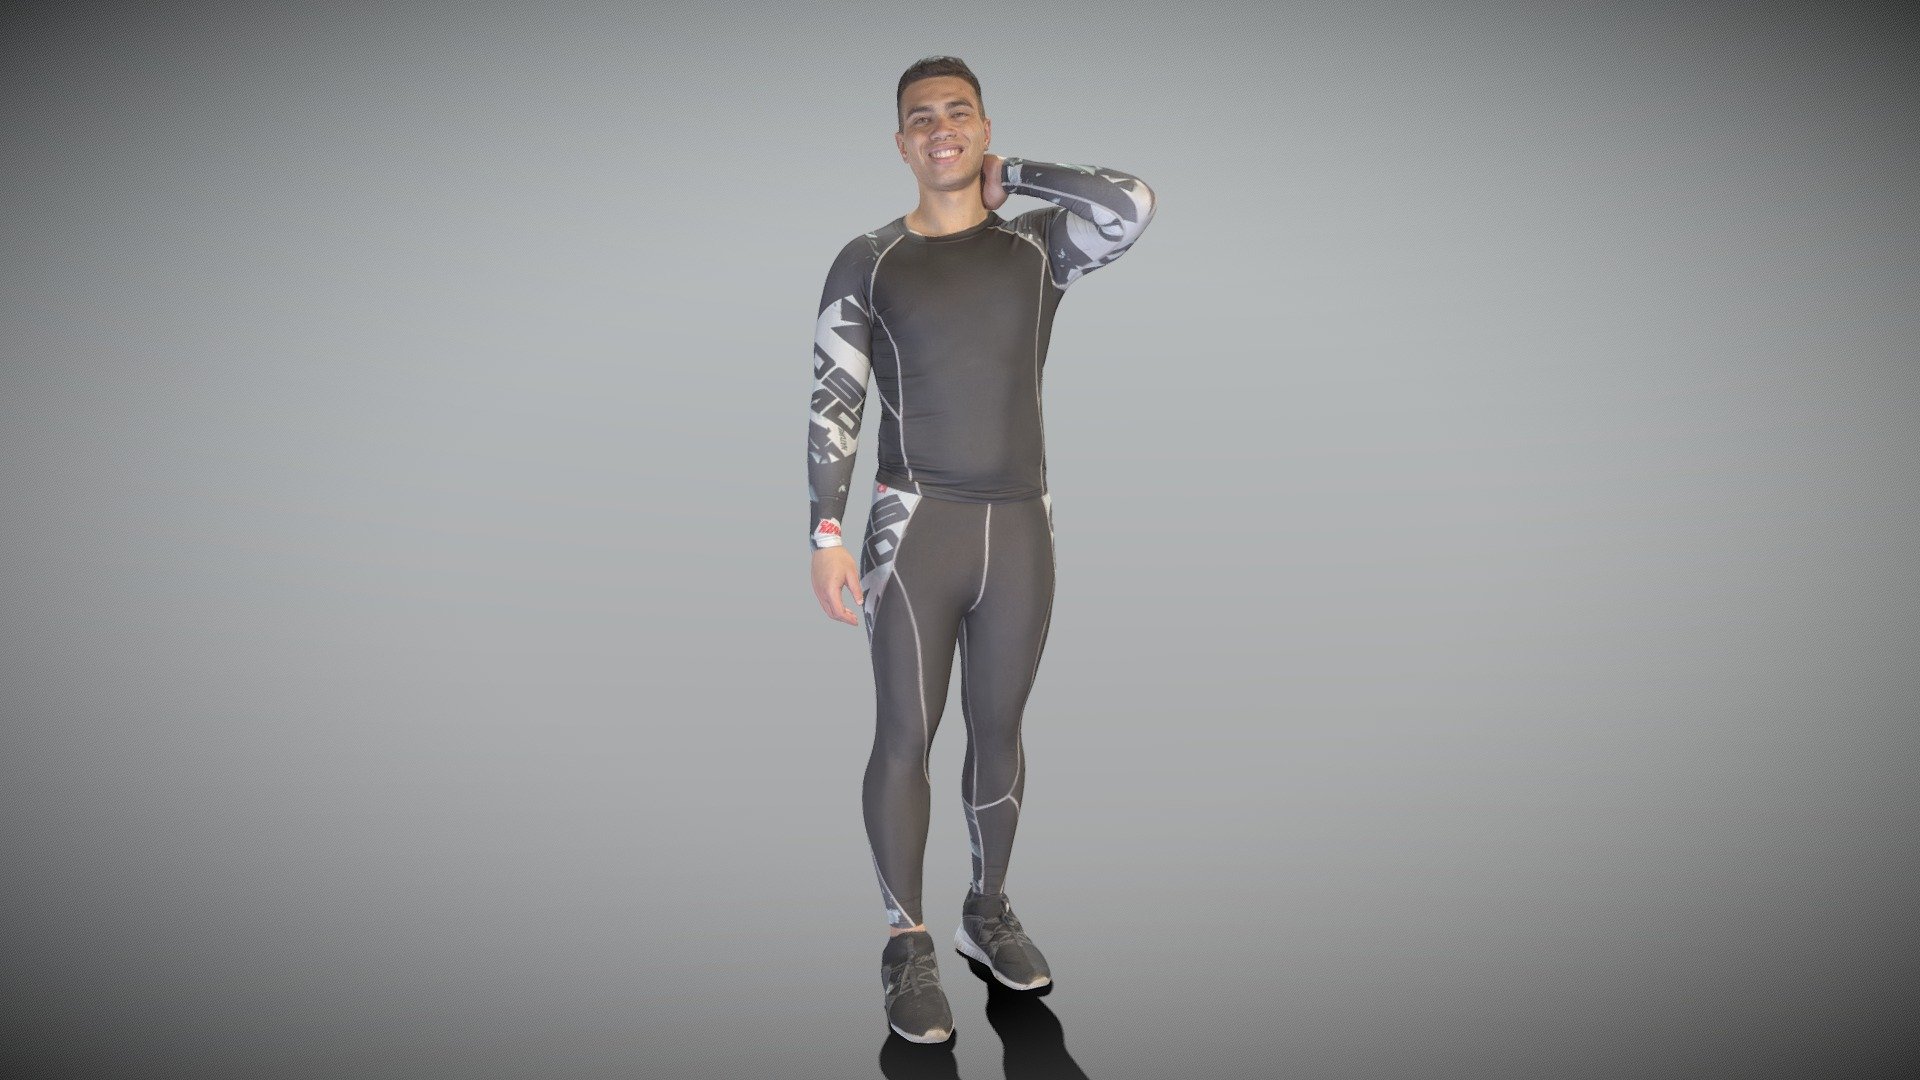 This is a true human size and detailed model of a sporty handsome young man of Caucasian appearance. The model is captured in casual pose to be perfectly matching for variety of architectural visualizations, e.g. gym, park, locker room, weight room, beach, VR/AR content, etc.

The product is ready both for immediate use in architectural visualisations, or further render and detailed sculpting in Zbrush.

Technical characteristics:




digital double 3d scan model

decimated model (100k triangles)

sufficiently clean

PBR textures: Diffuse, Normal, Specular maps

non-overlapping UV map

Download package includes Cinema 4D project file with Redshift shader, OBJ, FBX files, which are applicable for 3ds Max, Maya, Unreal Engine, Unity, Blender, etc. All the textures you will find in the Tex folder, included into the main archive.

You may find some of our 3d models in free access on SketchFab https://sketchfab.com/deep3dstudio/collections/sample-basic-3d-models

New 3d models every day! - Handsome young man in sportswear 329 - Buy Royalty Free 3D model by deep3dstudio 3d model